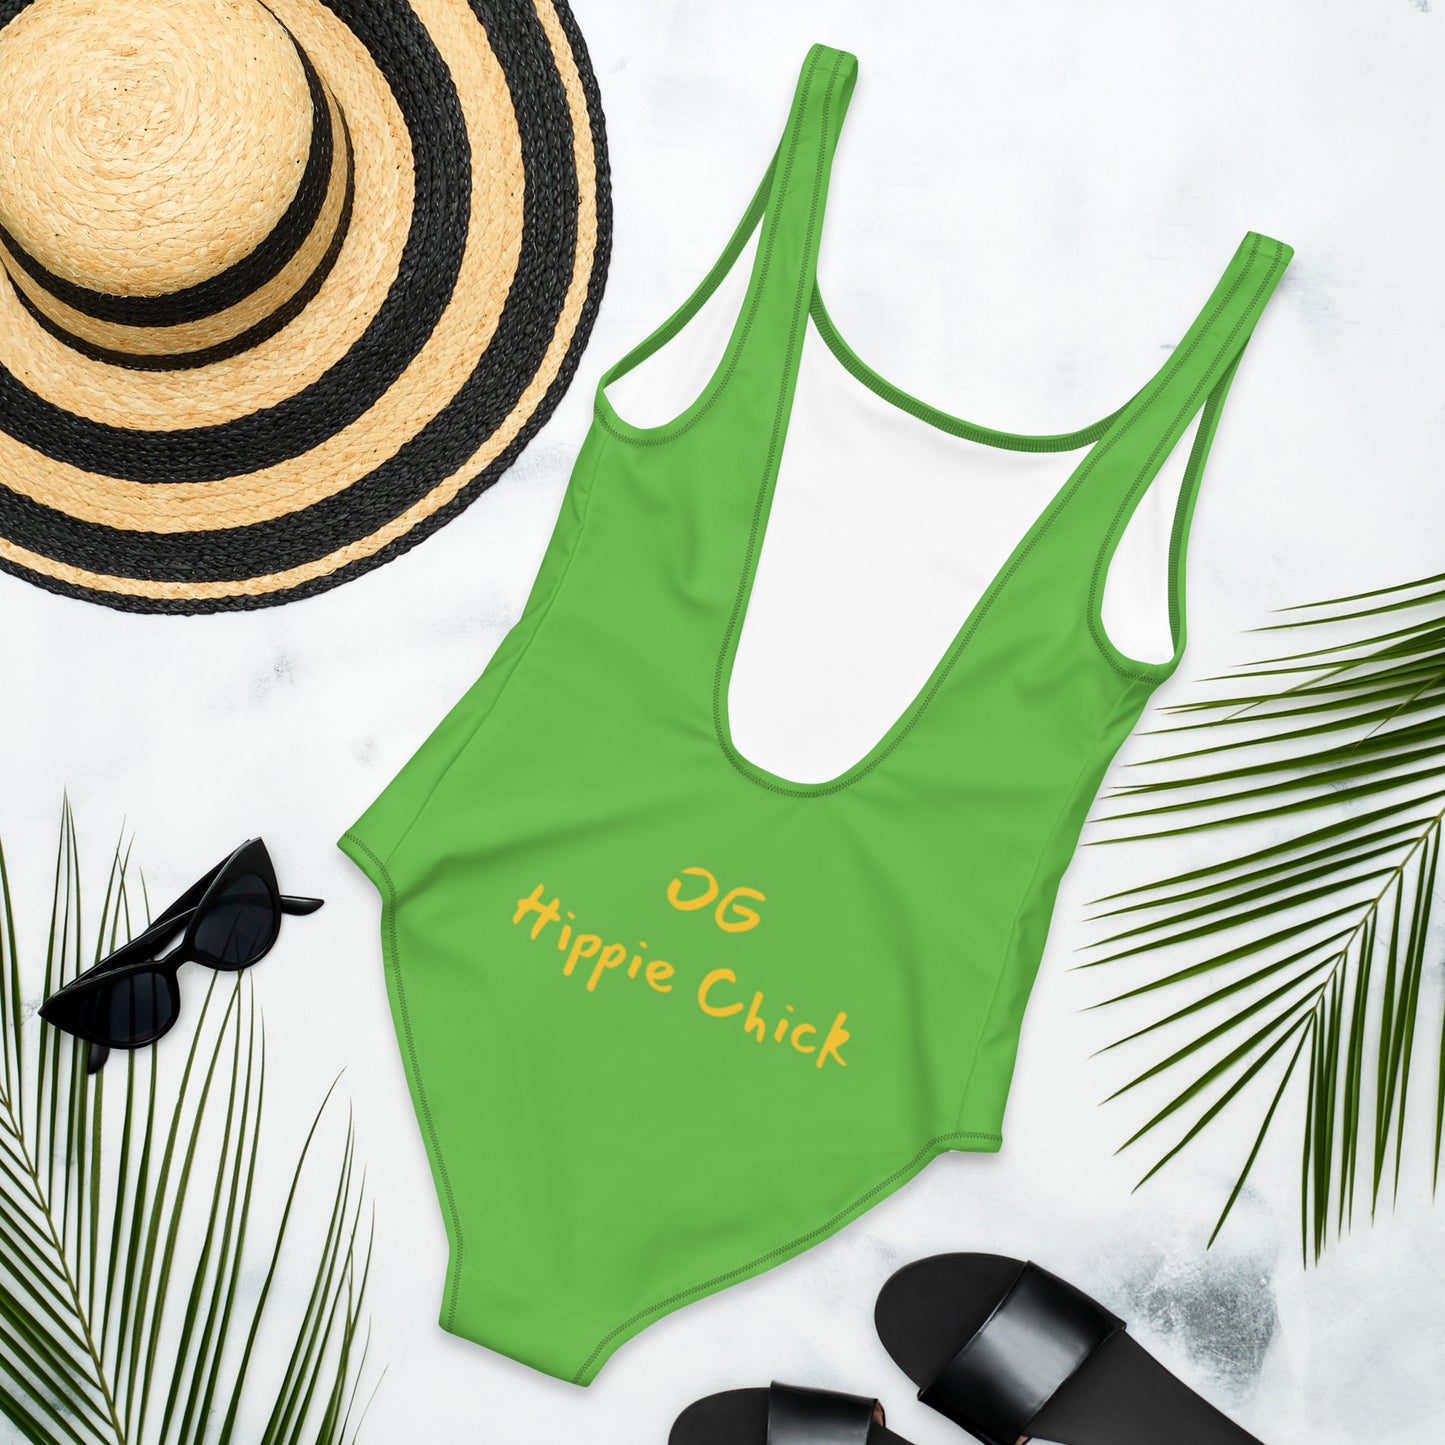 Grinch One Piece Swimsuit